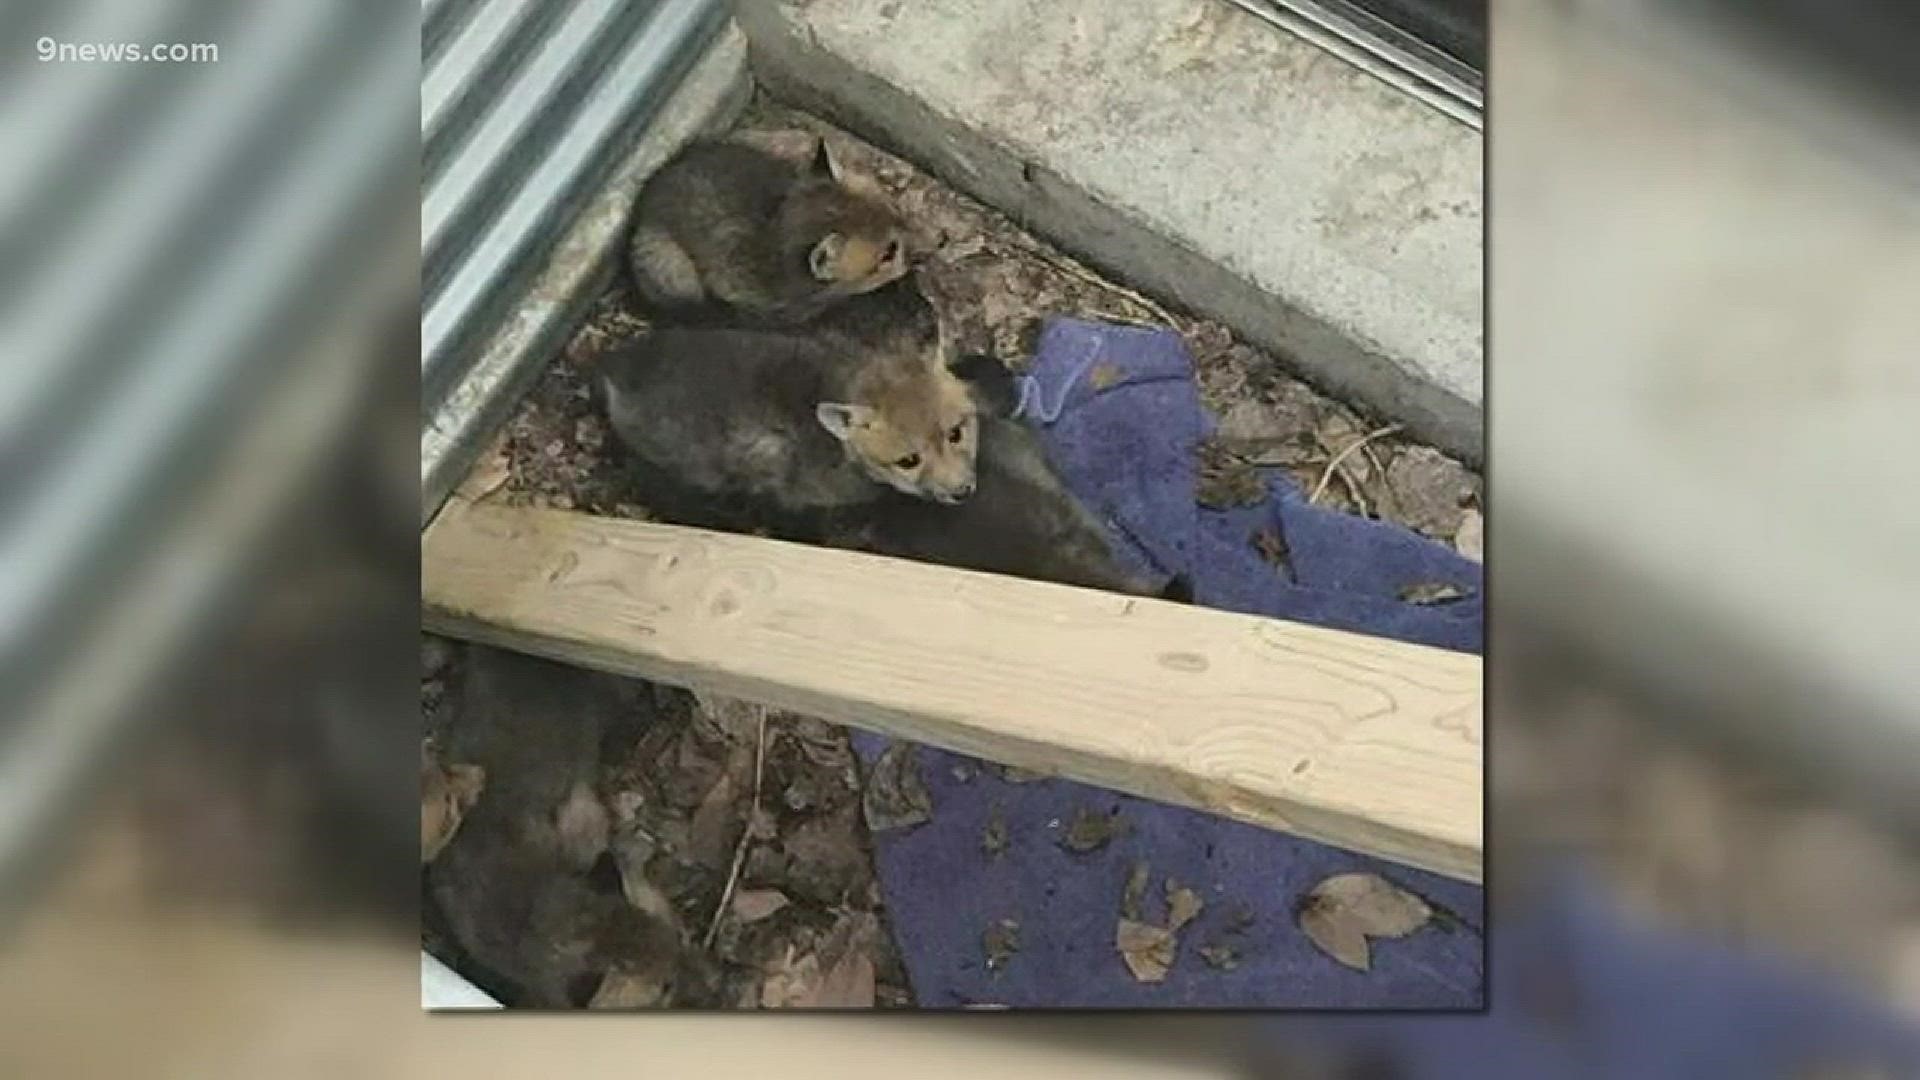 A litter of baby foxes (called a "kite") was found in the window well of a home in Ridgeview Heights. Animal rescue officers were able to reunite them with their parents.